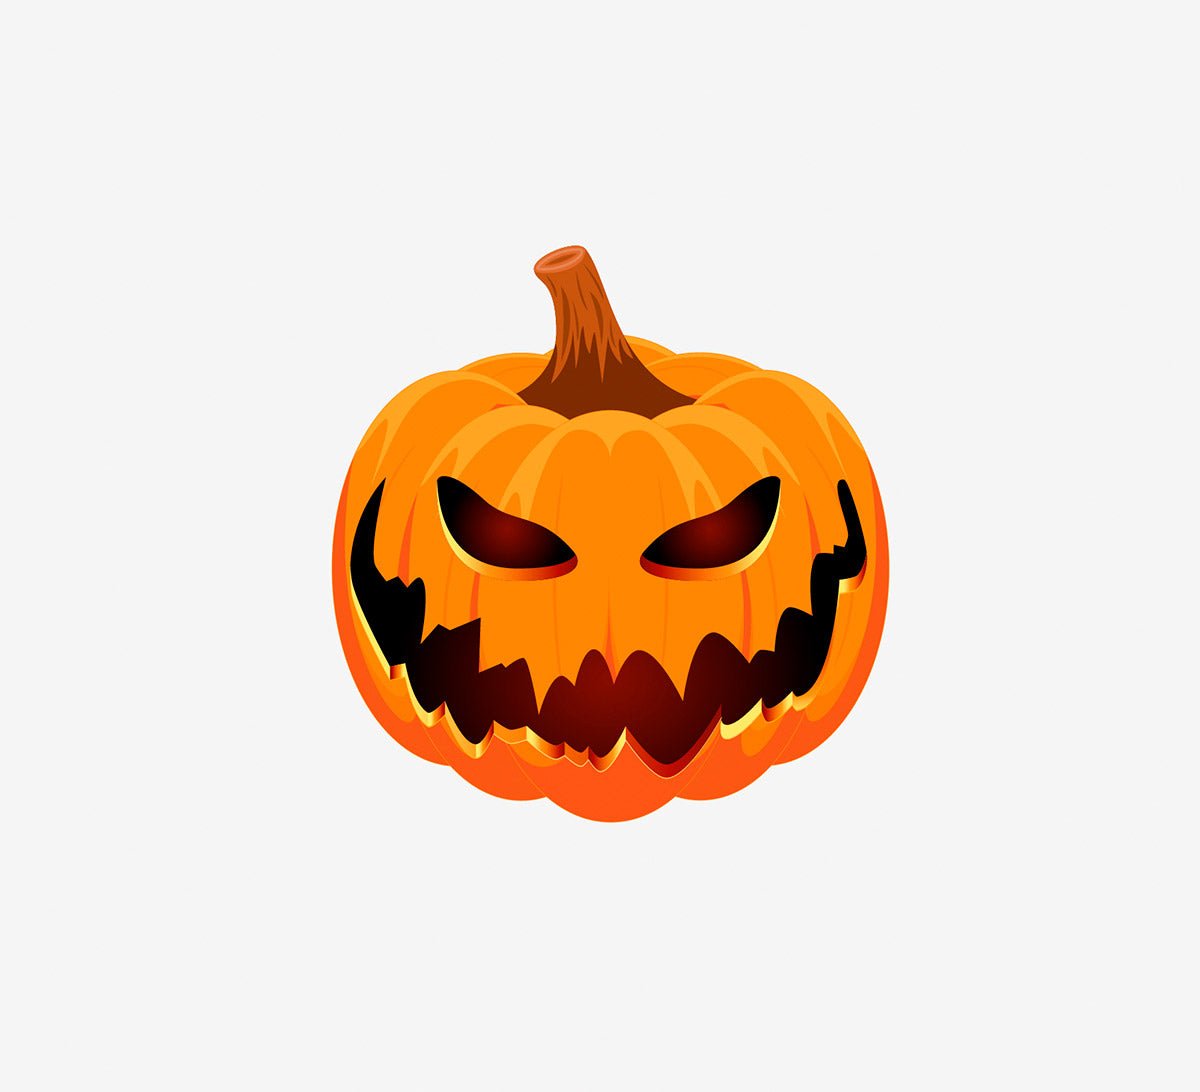 Illustration of a carved Jack O' Lantern Pumpkin Decals with a menacing face, glowing eyes, and jagged teeth, set against a plain white background by Cover-Alls.